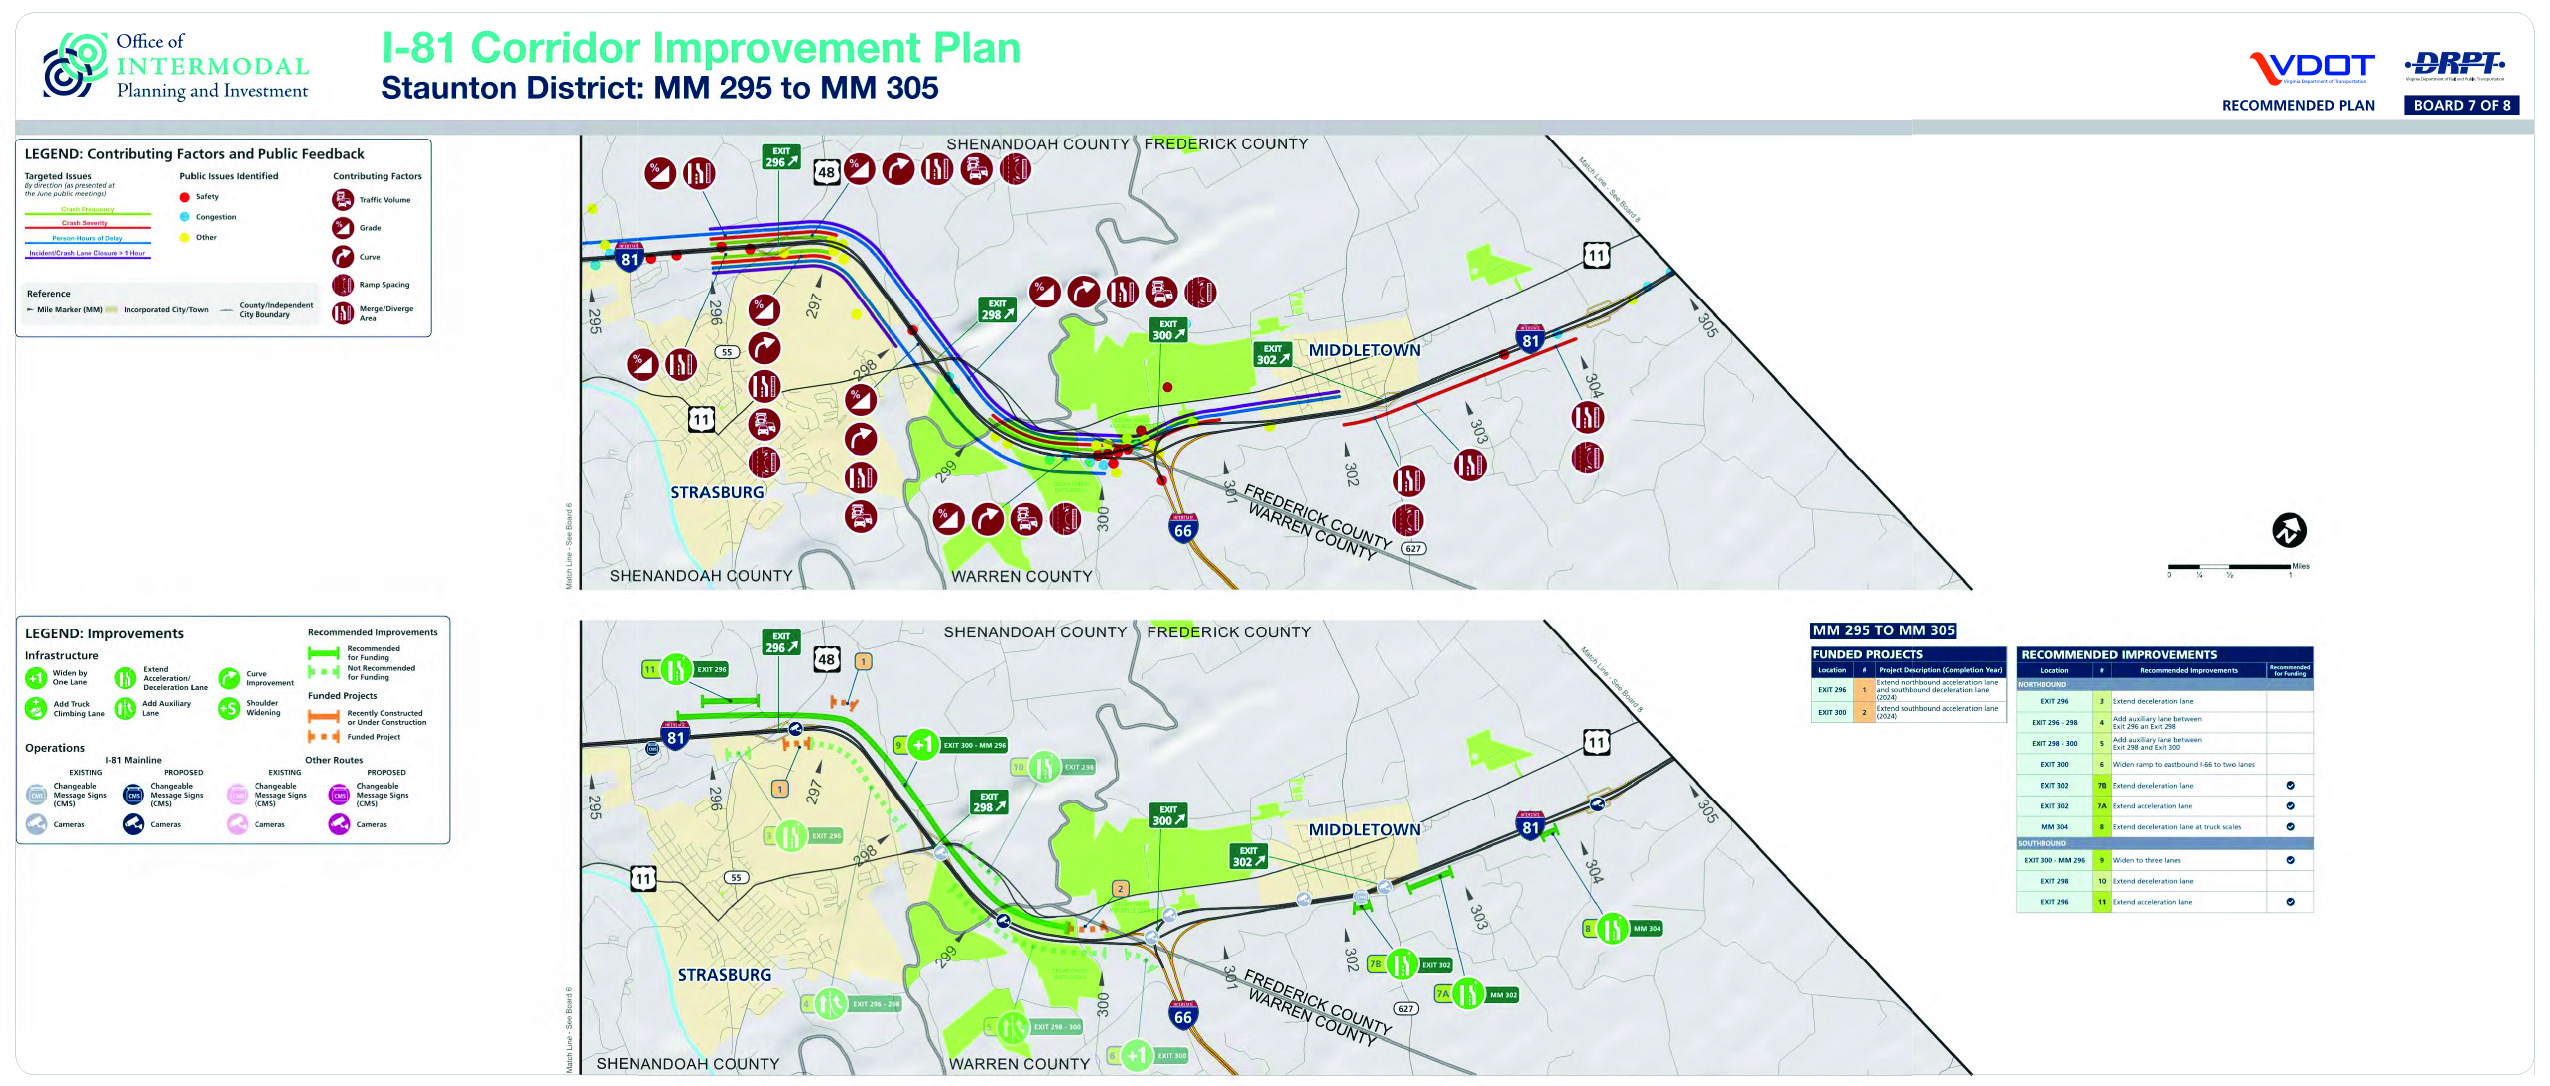 Diagrams on Page 17 from Appendix G of the I-81 Corridor Improvement Plan